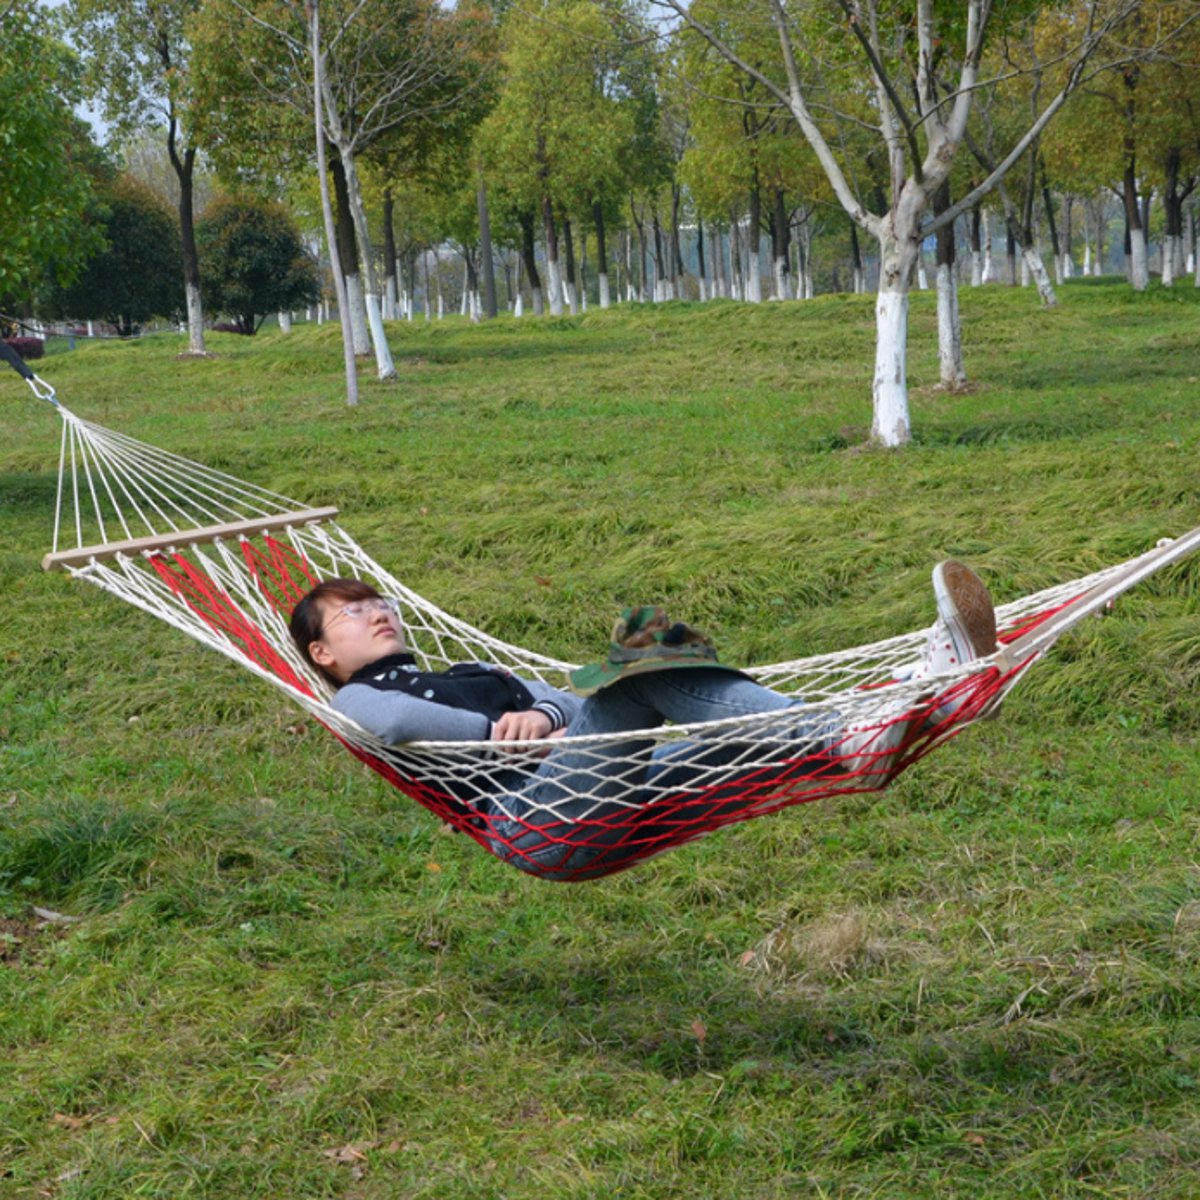 190x80cm-Outdoor-Camping-Hammock-Cotton-Rope-Swing-Hanging-Bed-Garden-Patio-Max-Load-100kg-1445183